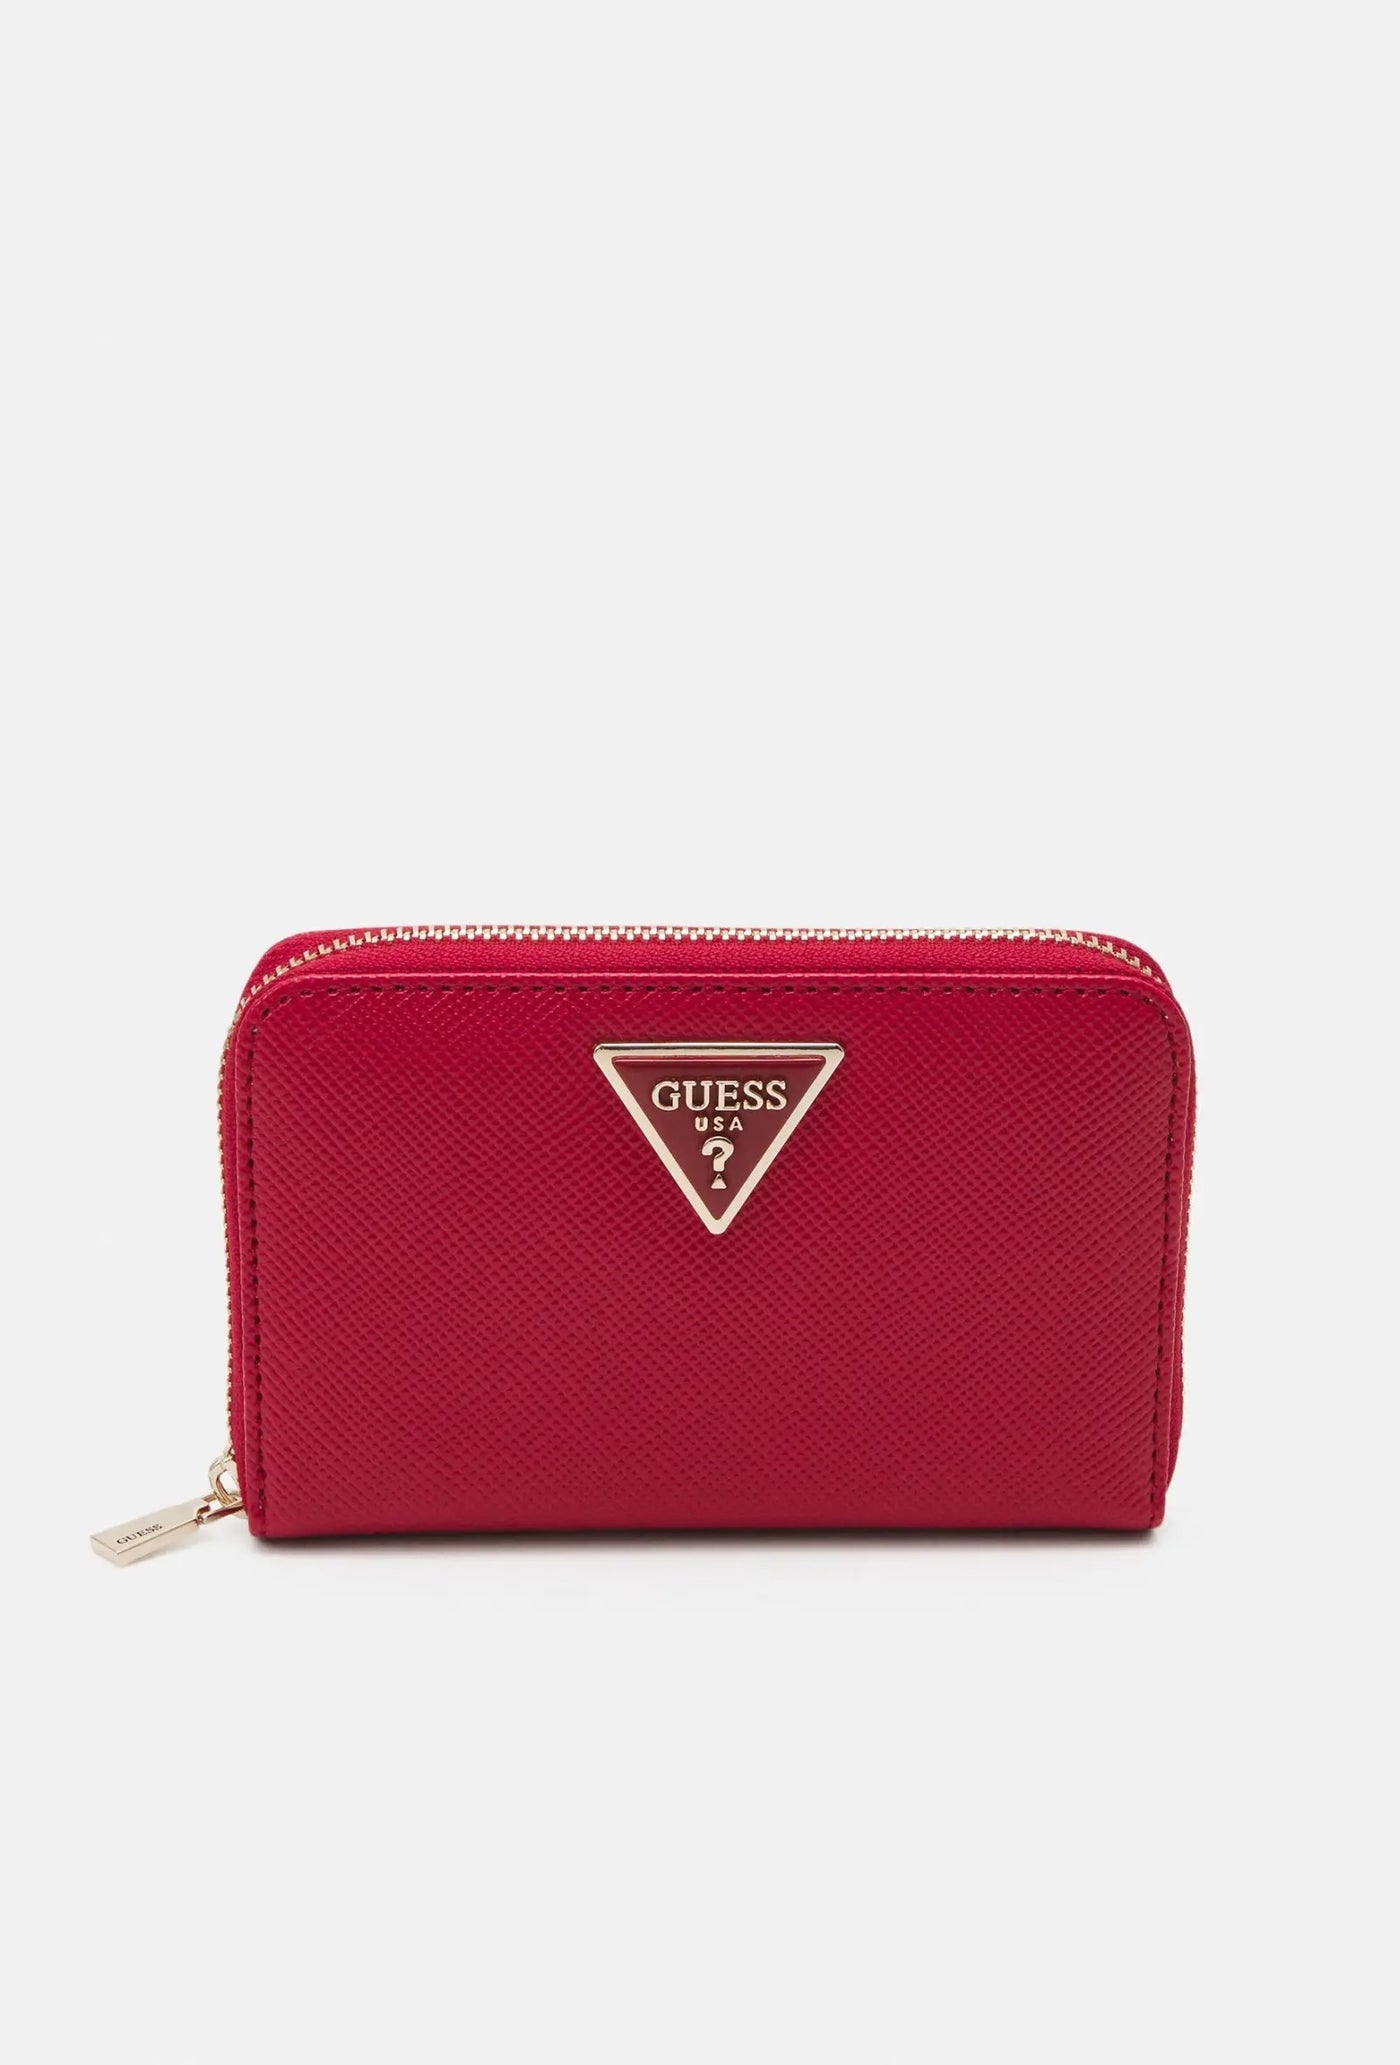 Compagnon / Portefeuille Guess Laurel Slg Card & Co Red ZG850040